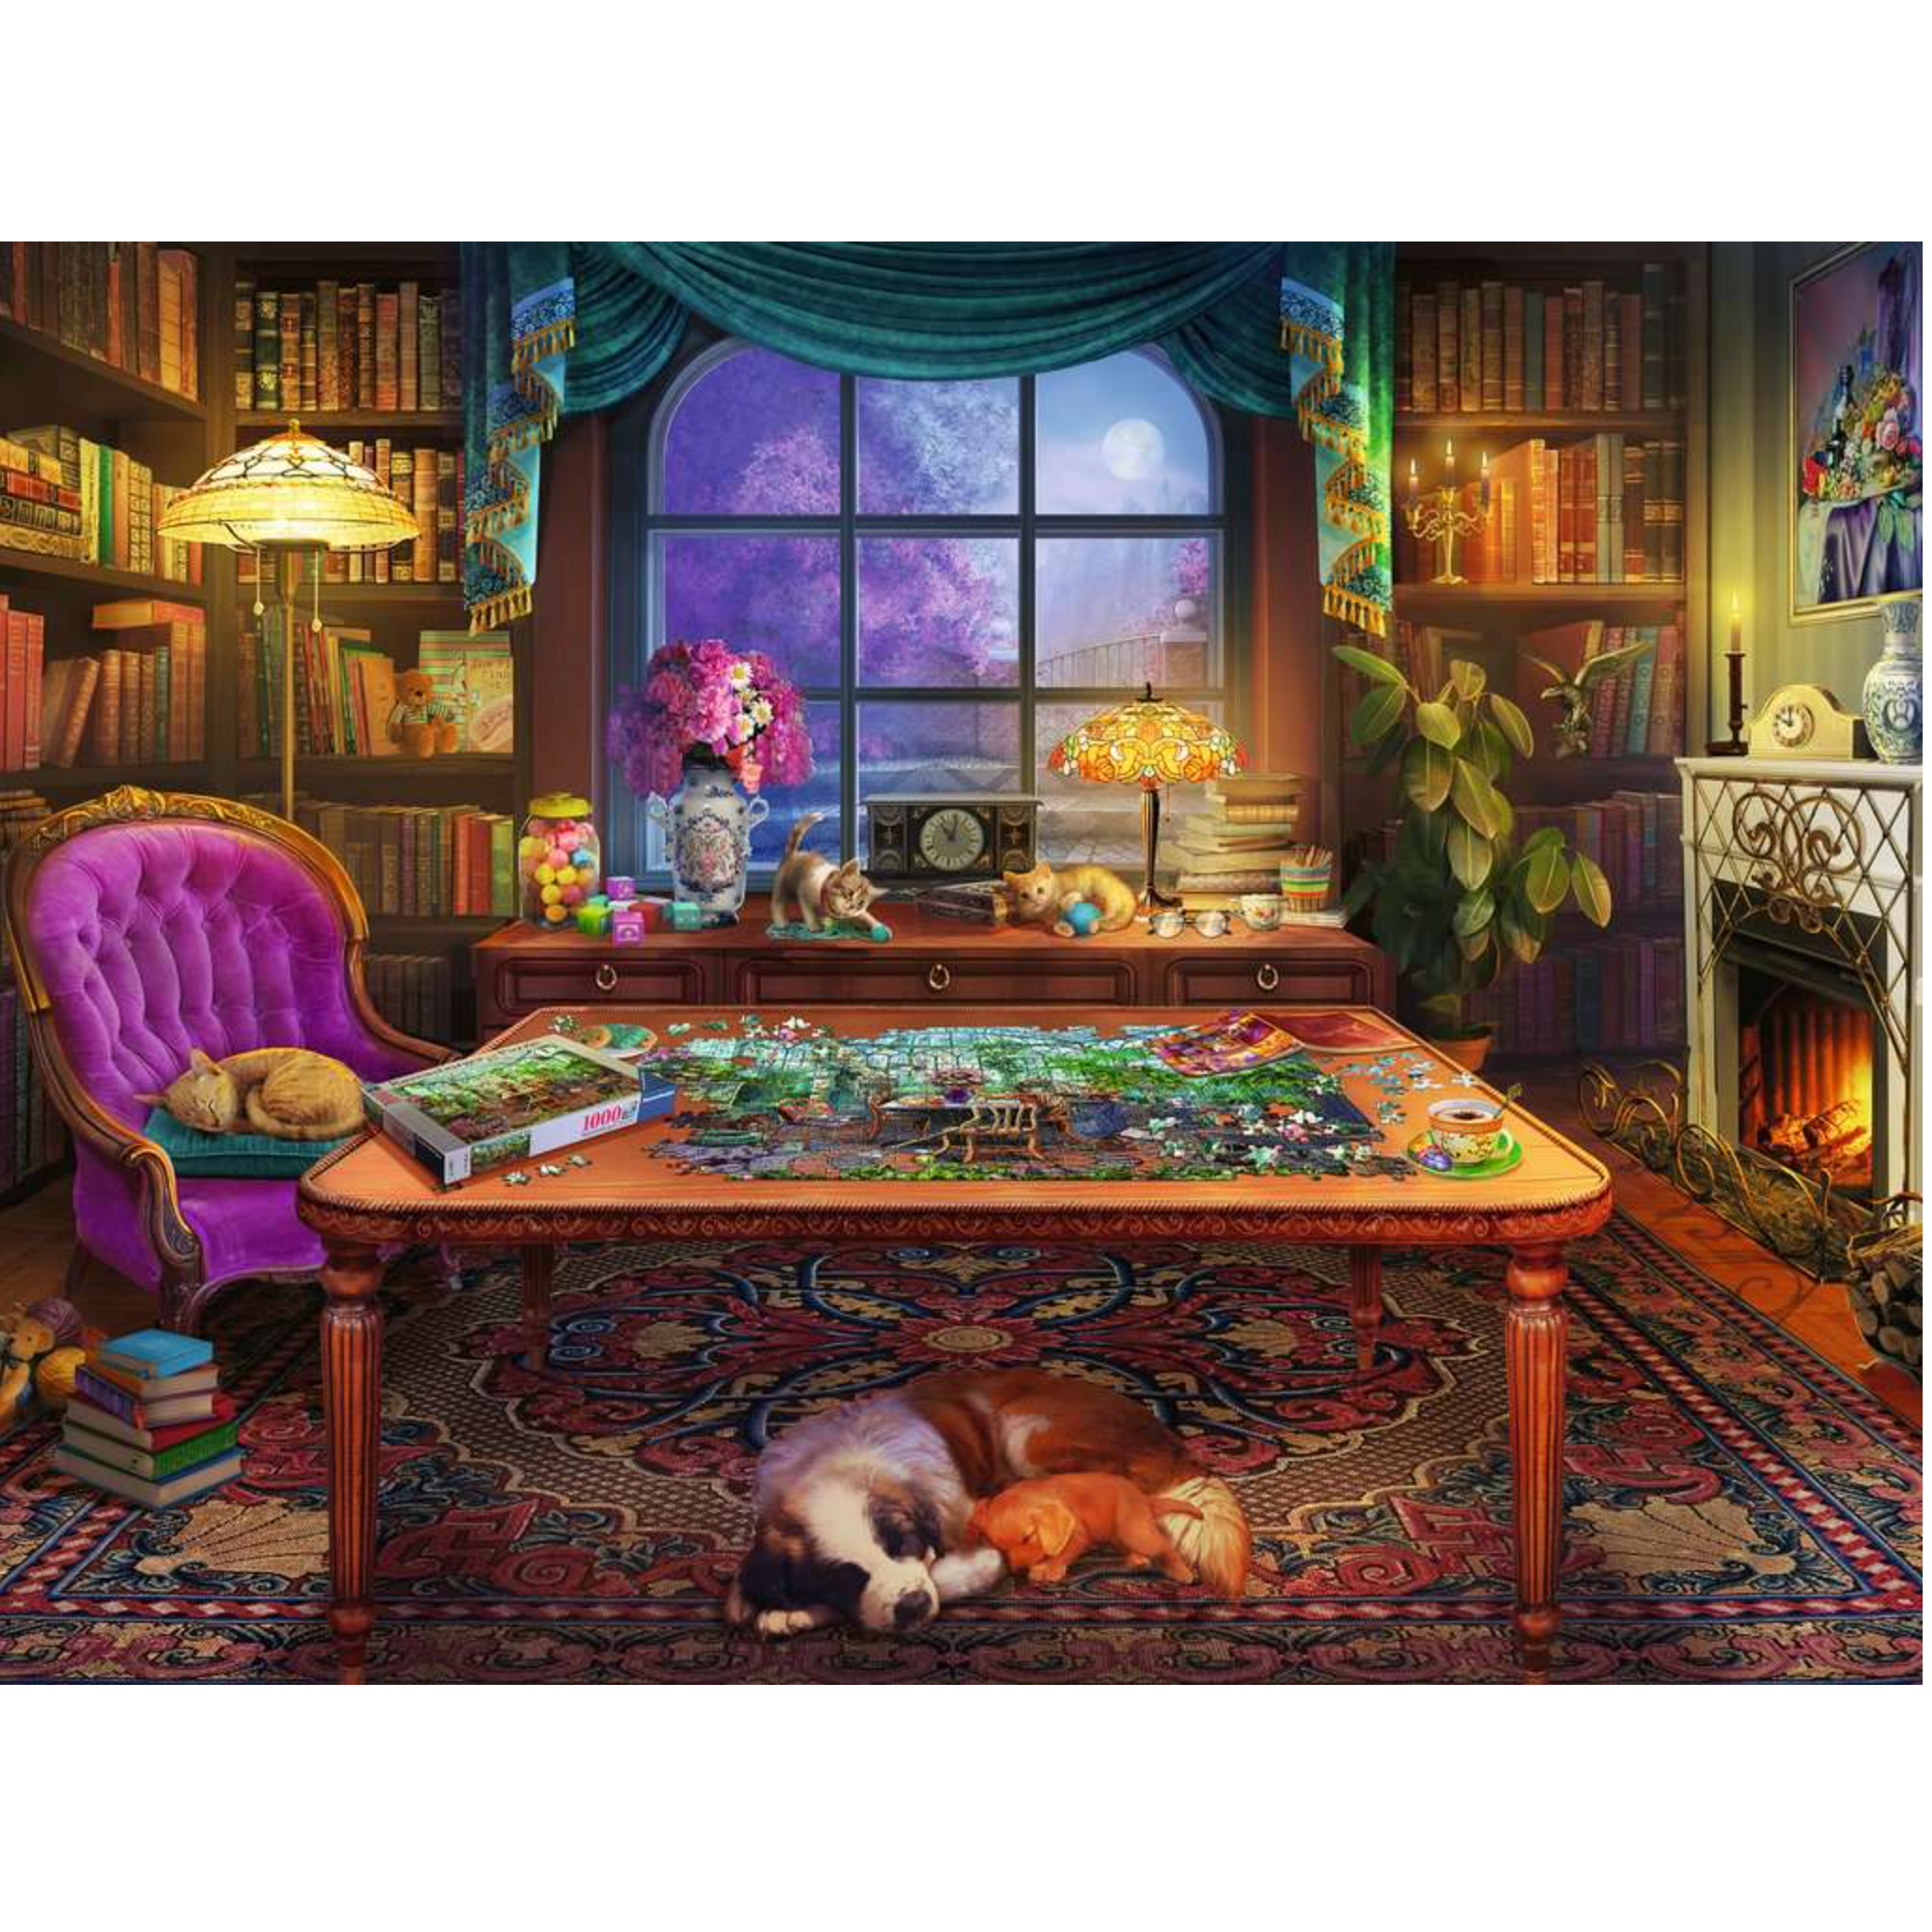 16444 Puzzlers Place 750pc